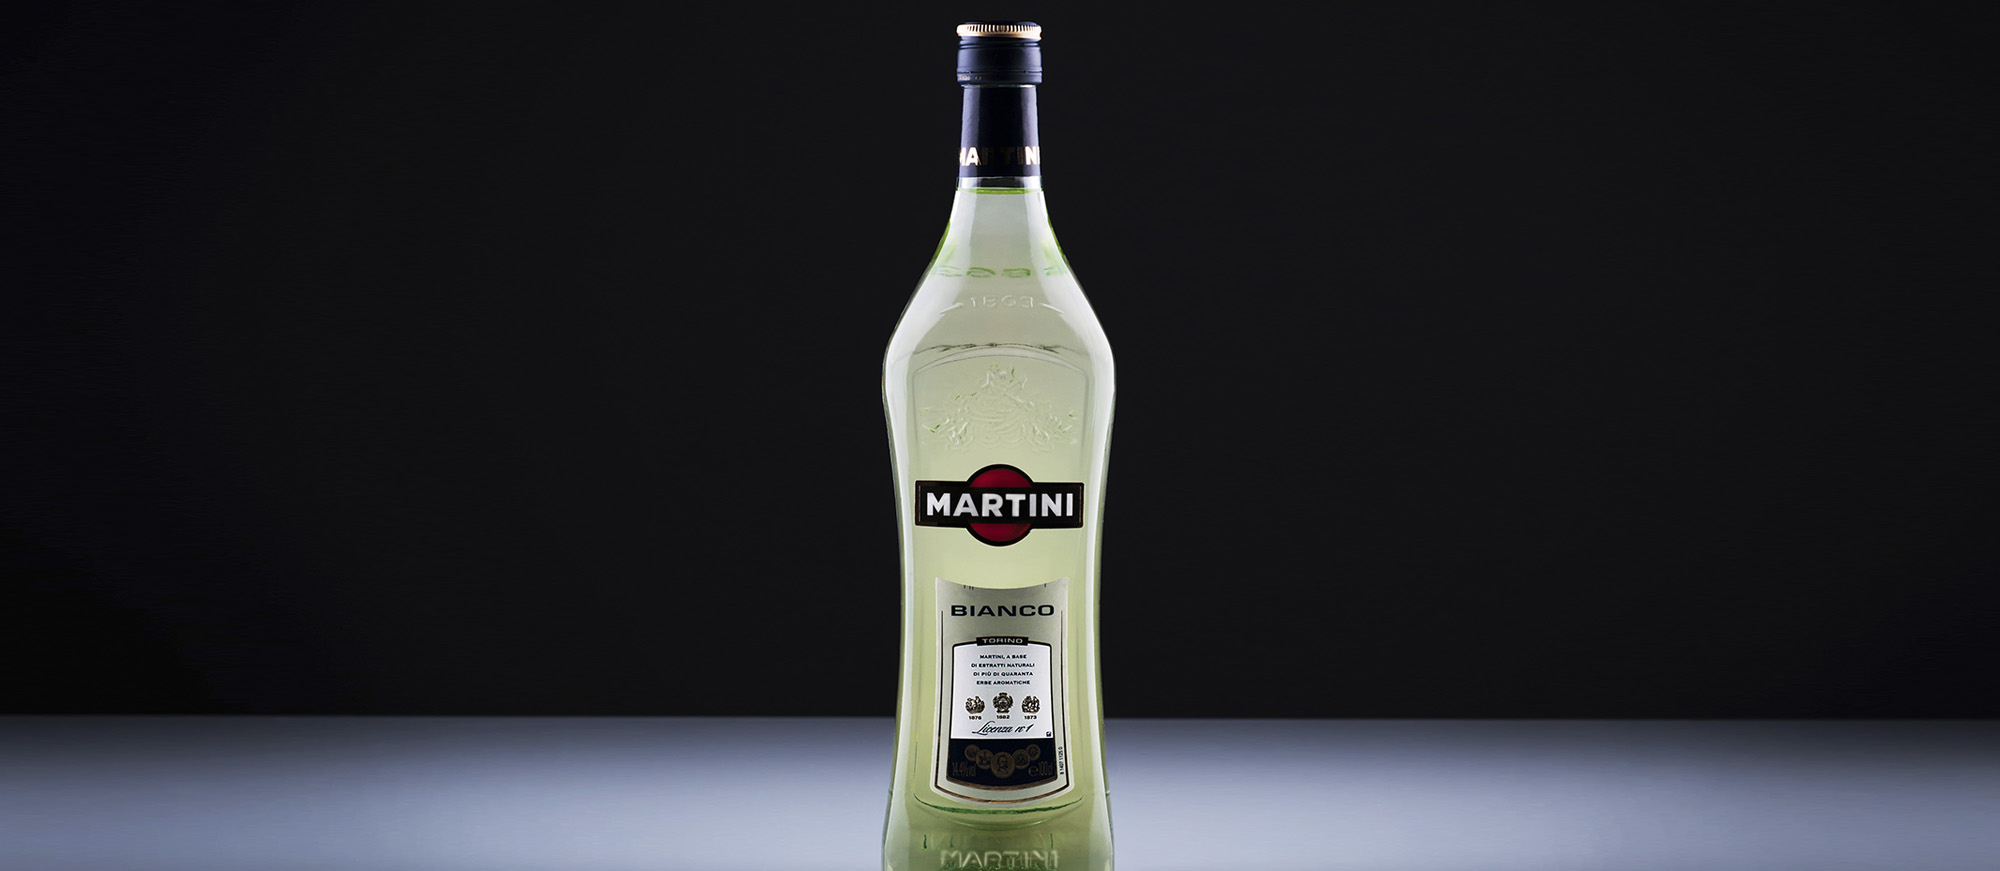 Martini Bianco  Local Fortified Wine From Turin, Italy